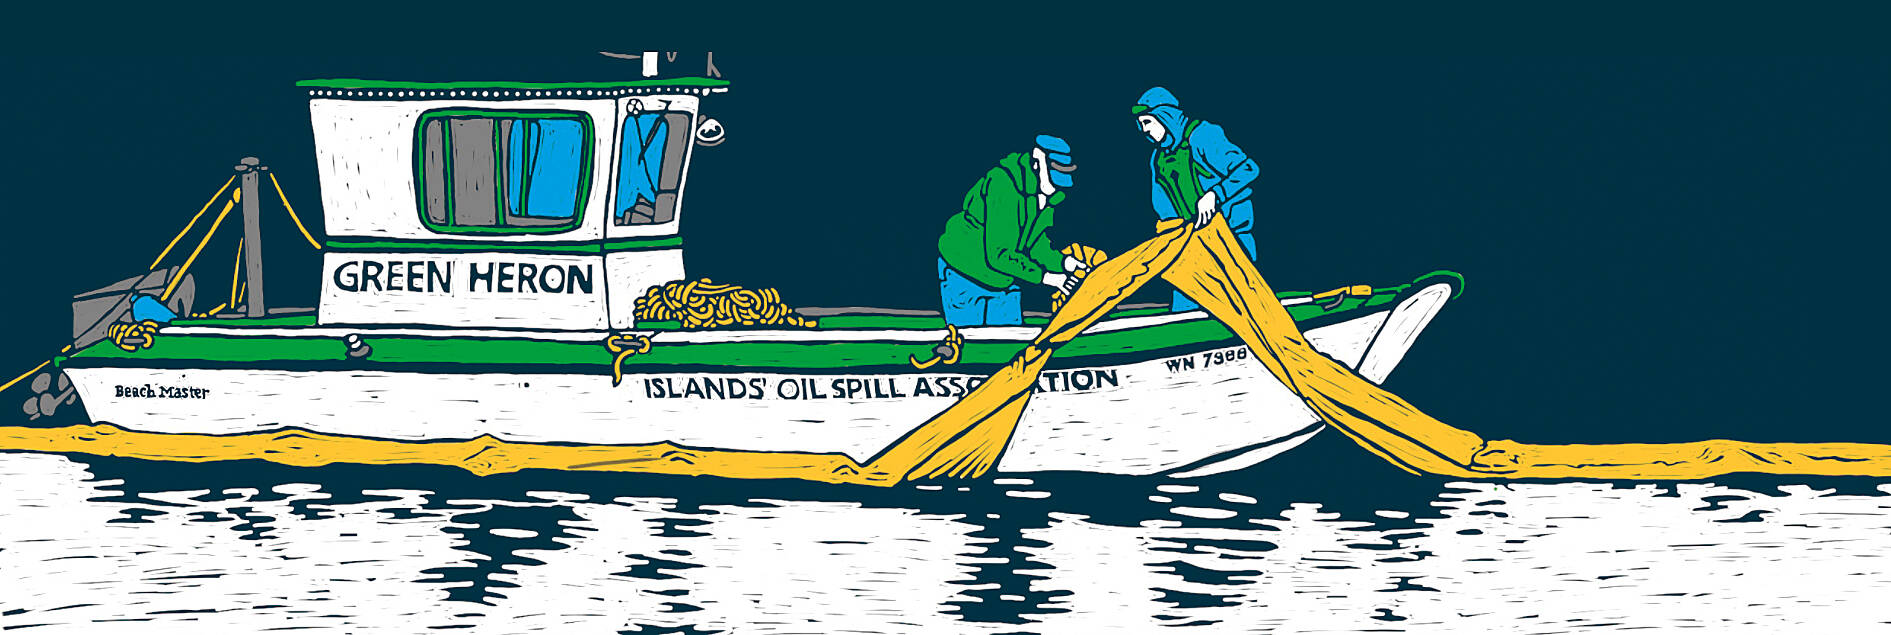 Island’s Oil Spill Association/Contributed image